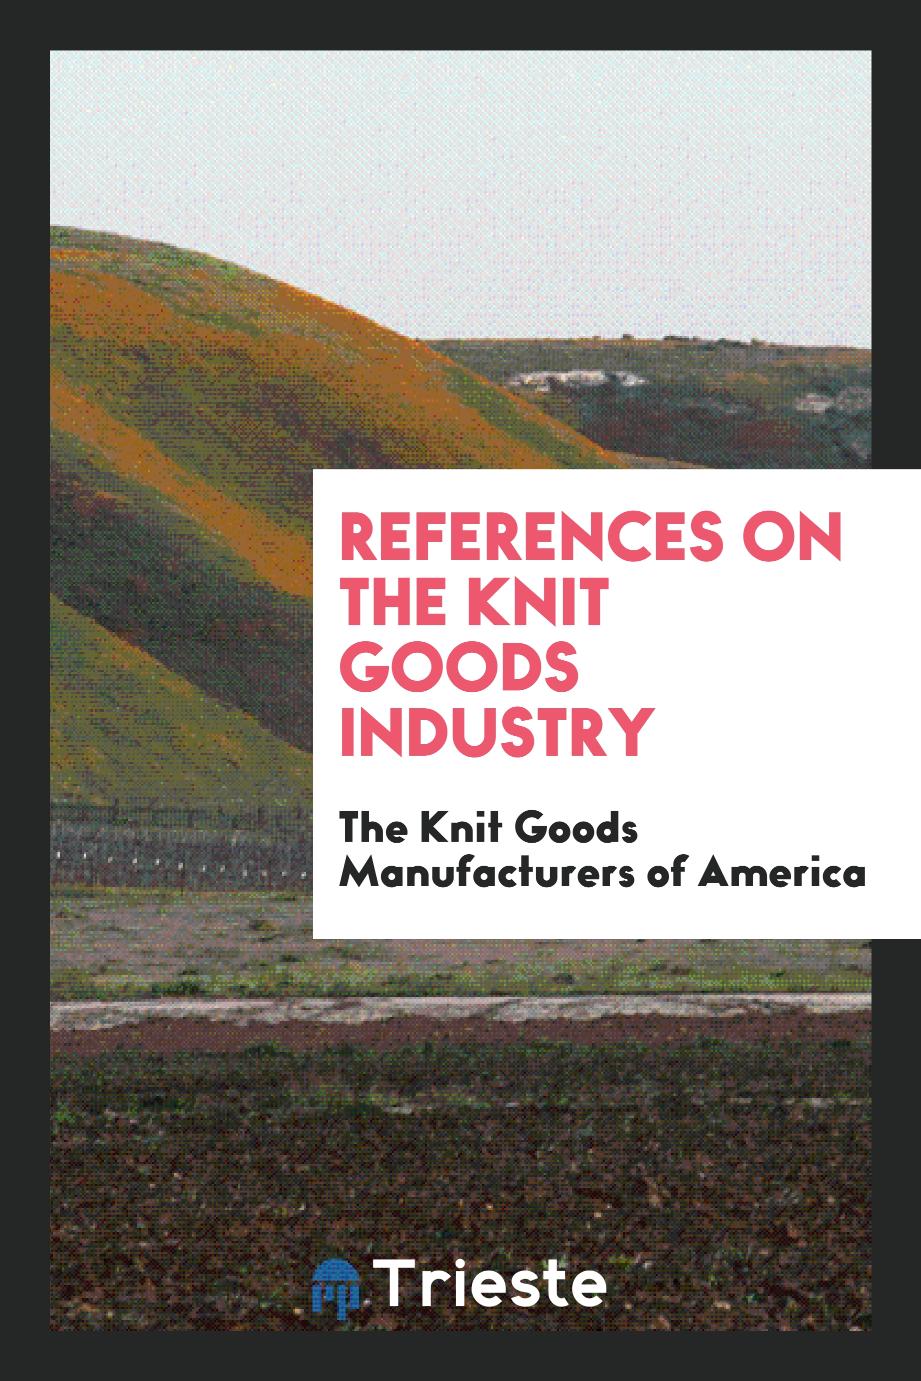 References on the knit goods industry